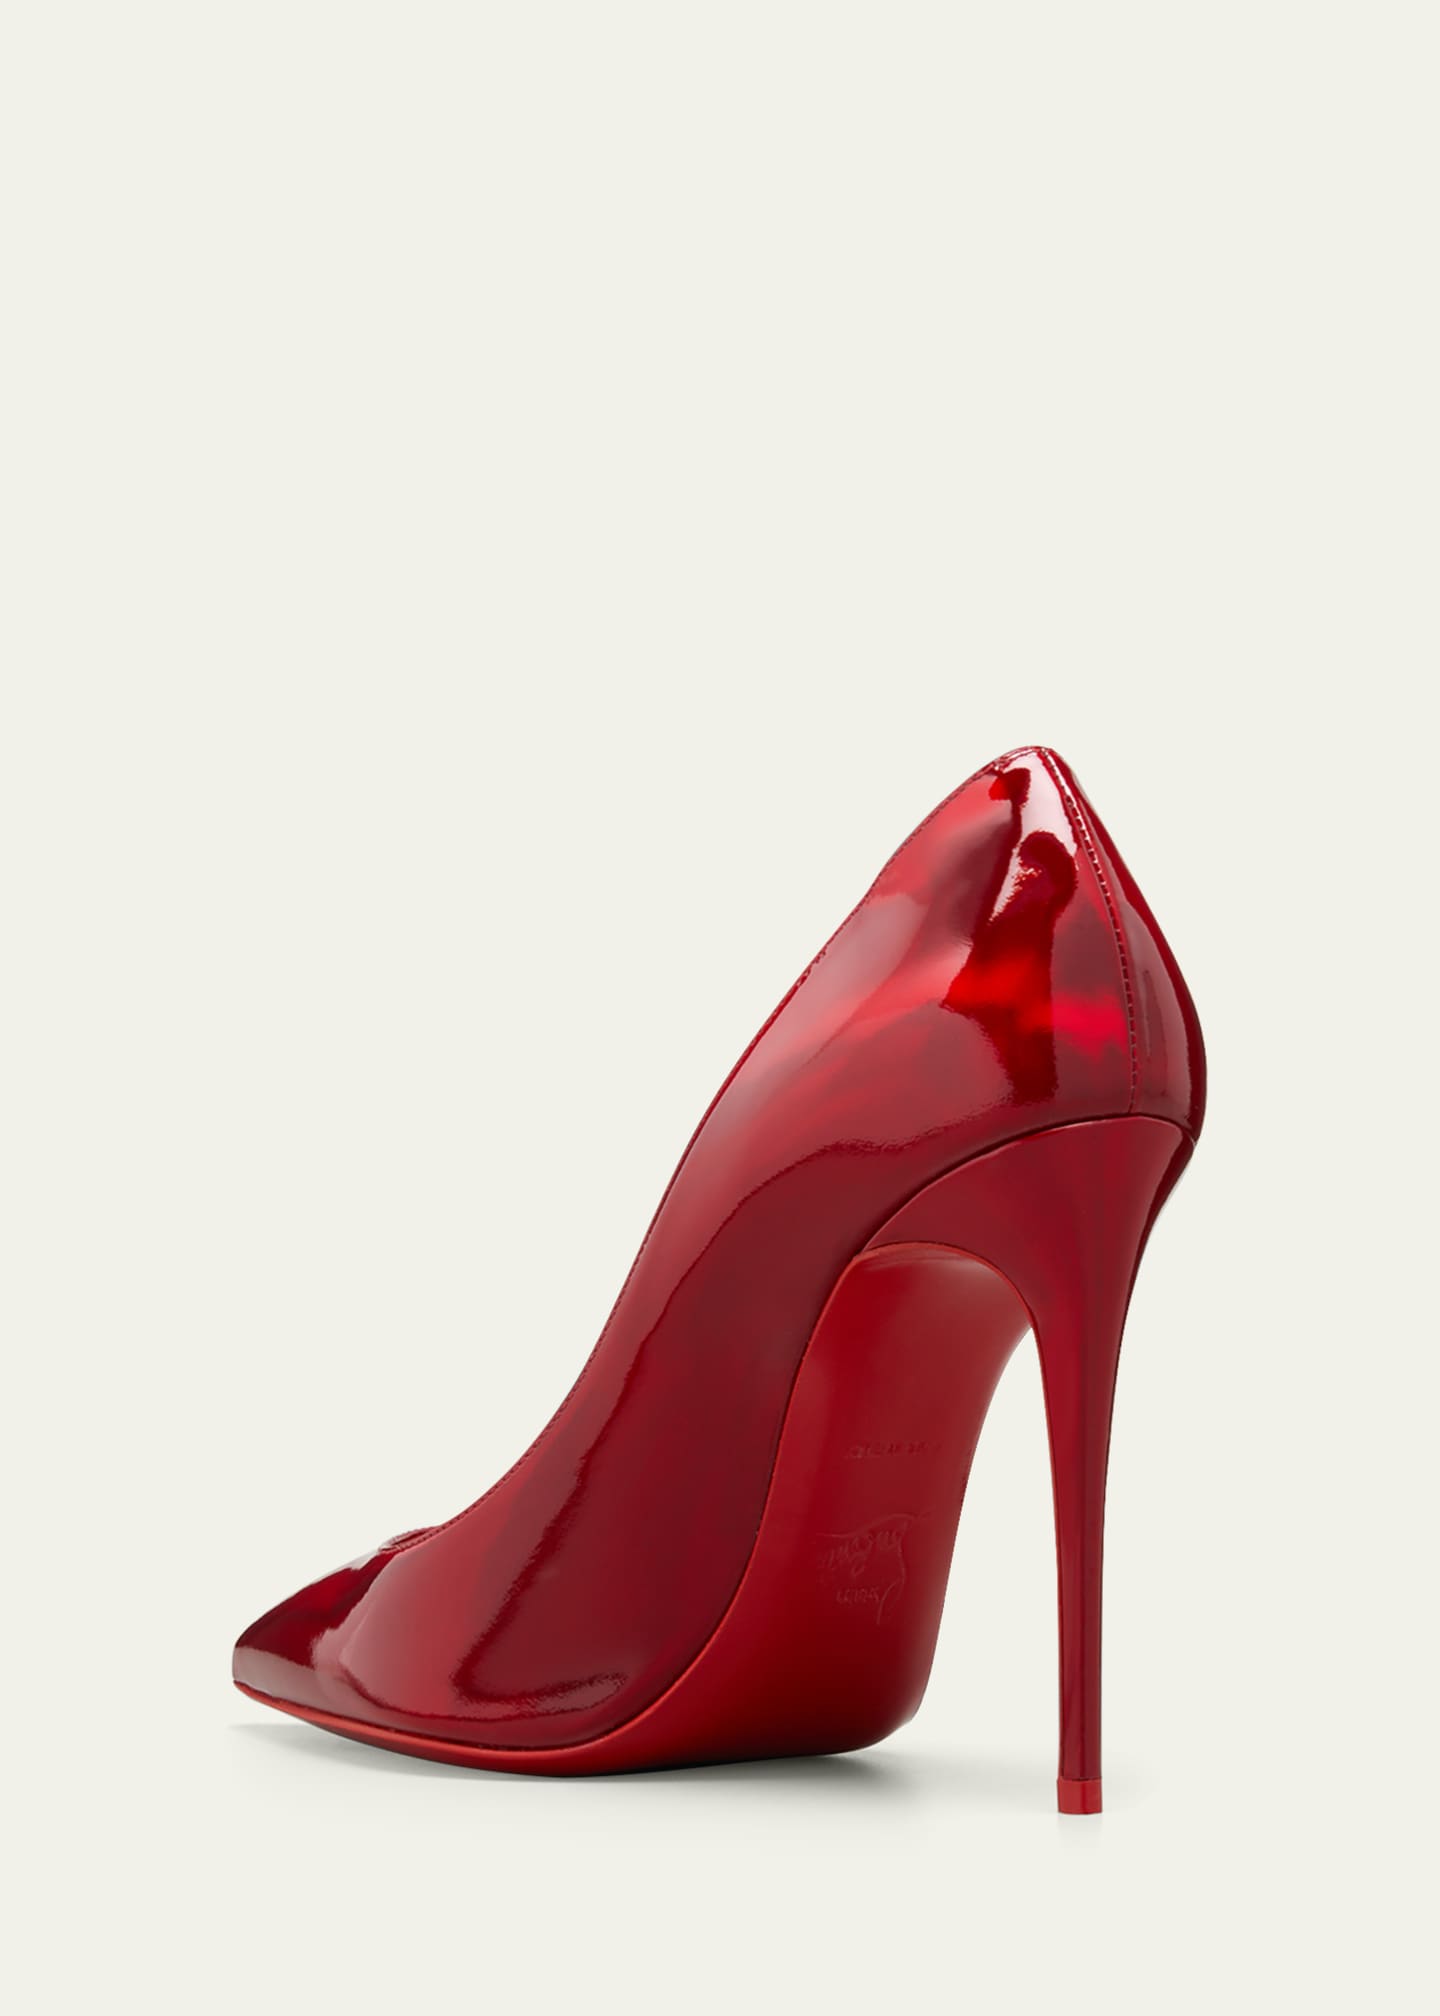 Christian Louboutin Kate Patent Pointed-Toe Red Sole High-Heel Pumps ...